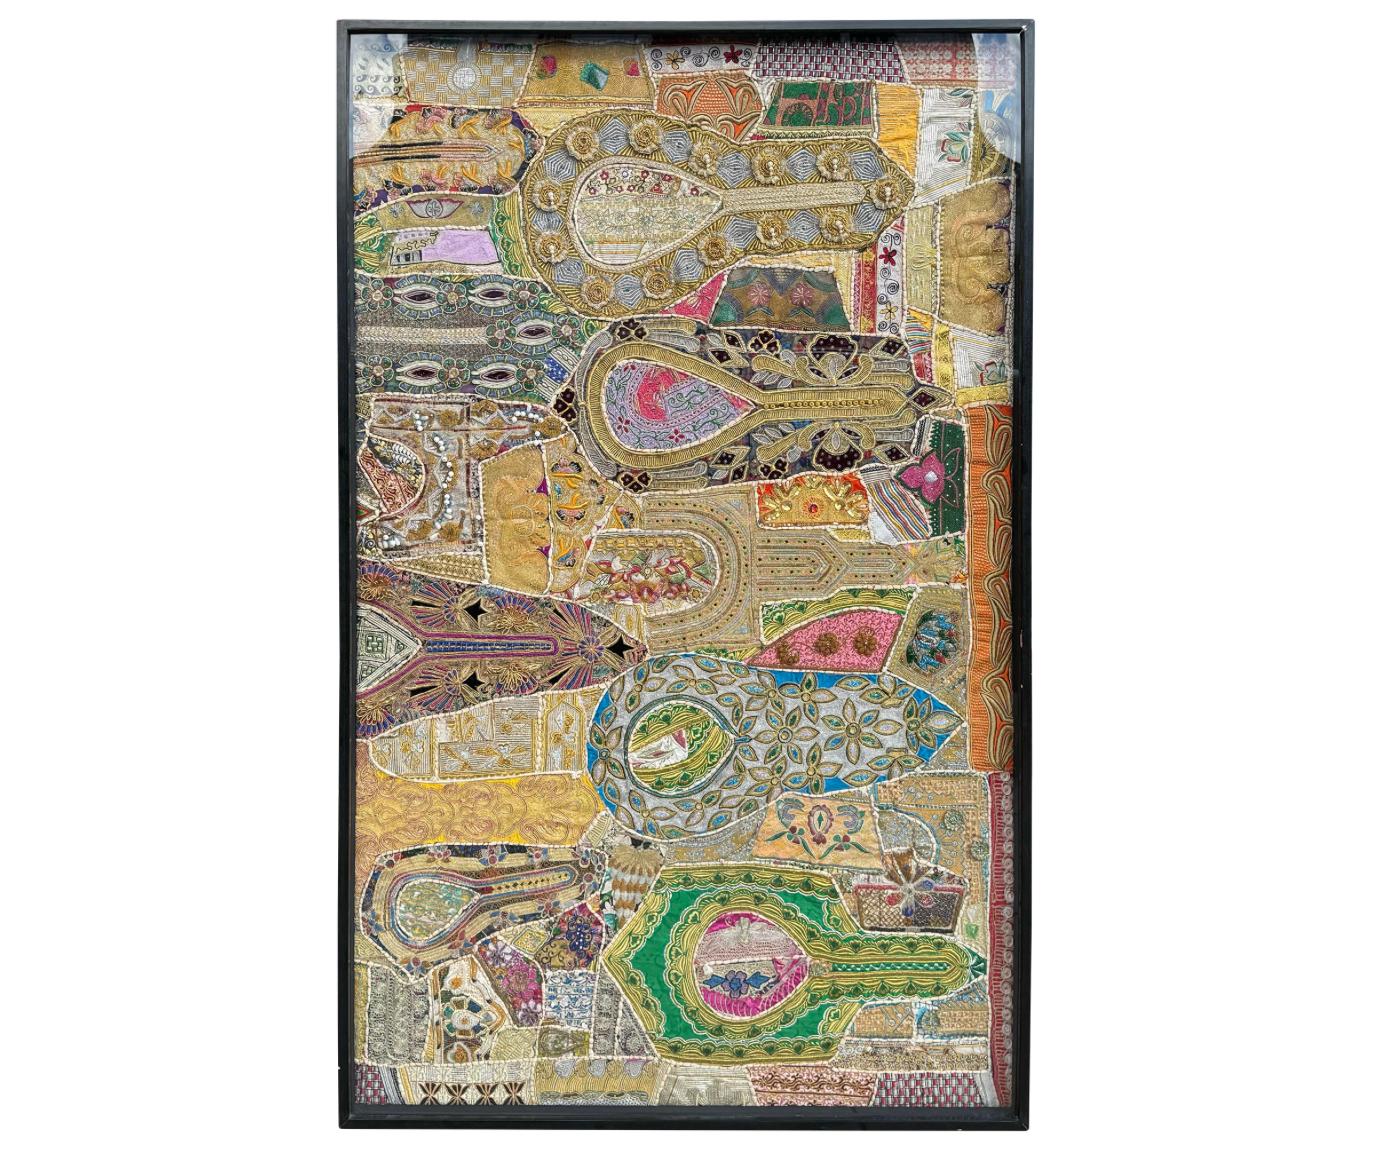 Beads Tony Duquette Framed Balinese Textile Tapestry For Sale